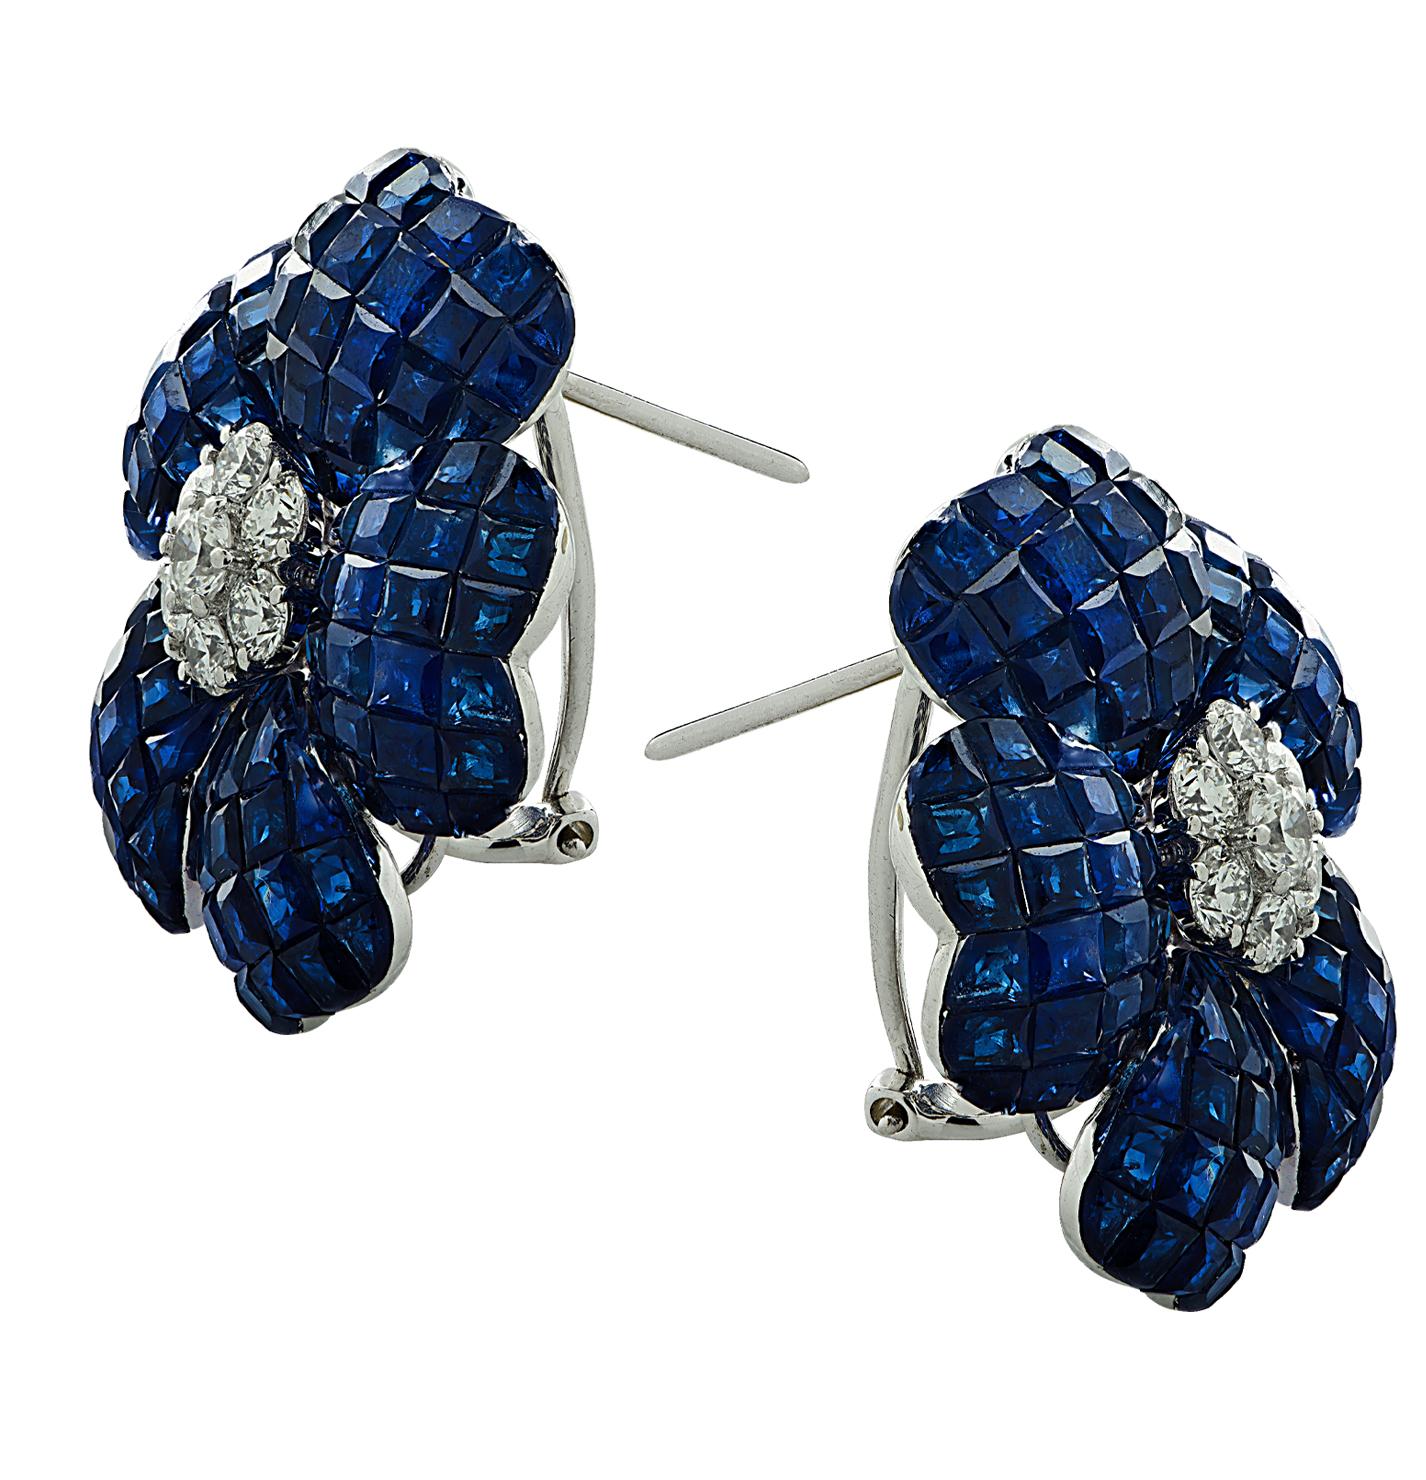 Enchanting Sapphire and Diamond Stud Earrings crafted in 18 karat white gold, featuring square cut Sapphires weighing approximately 37.85 carats total, and round brilliant cut diamonds weigh approximately 1.10 carats total, G color, VS clarity.